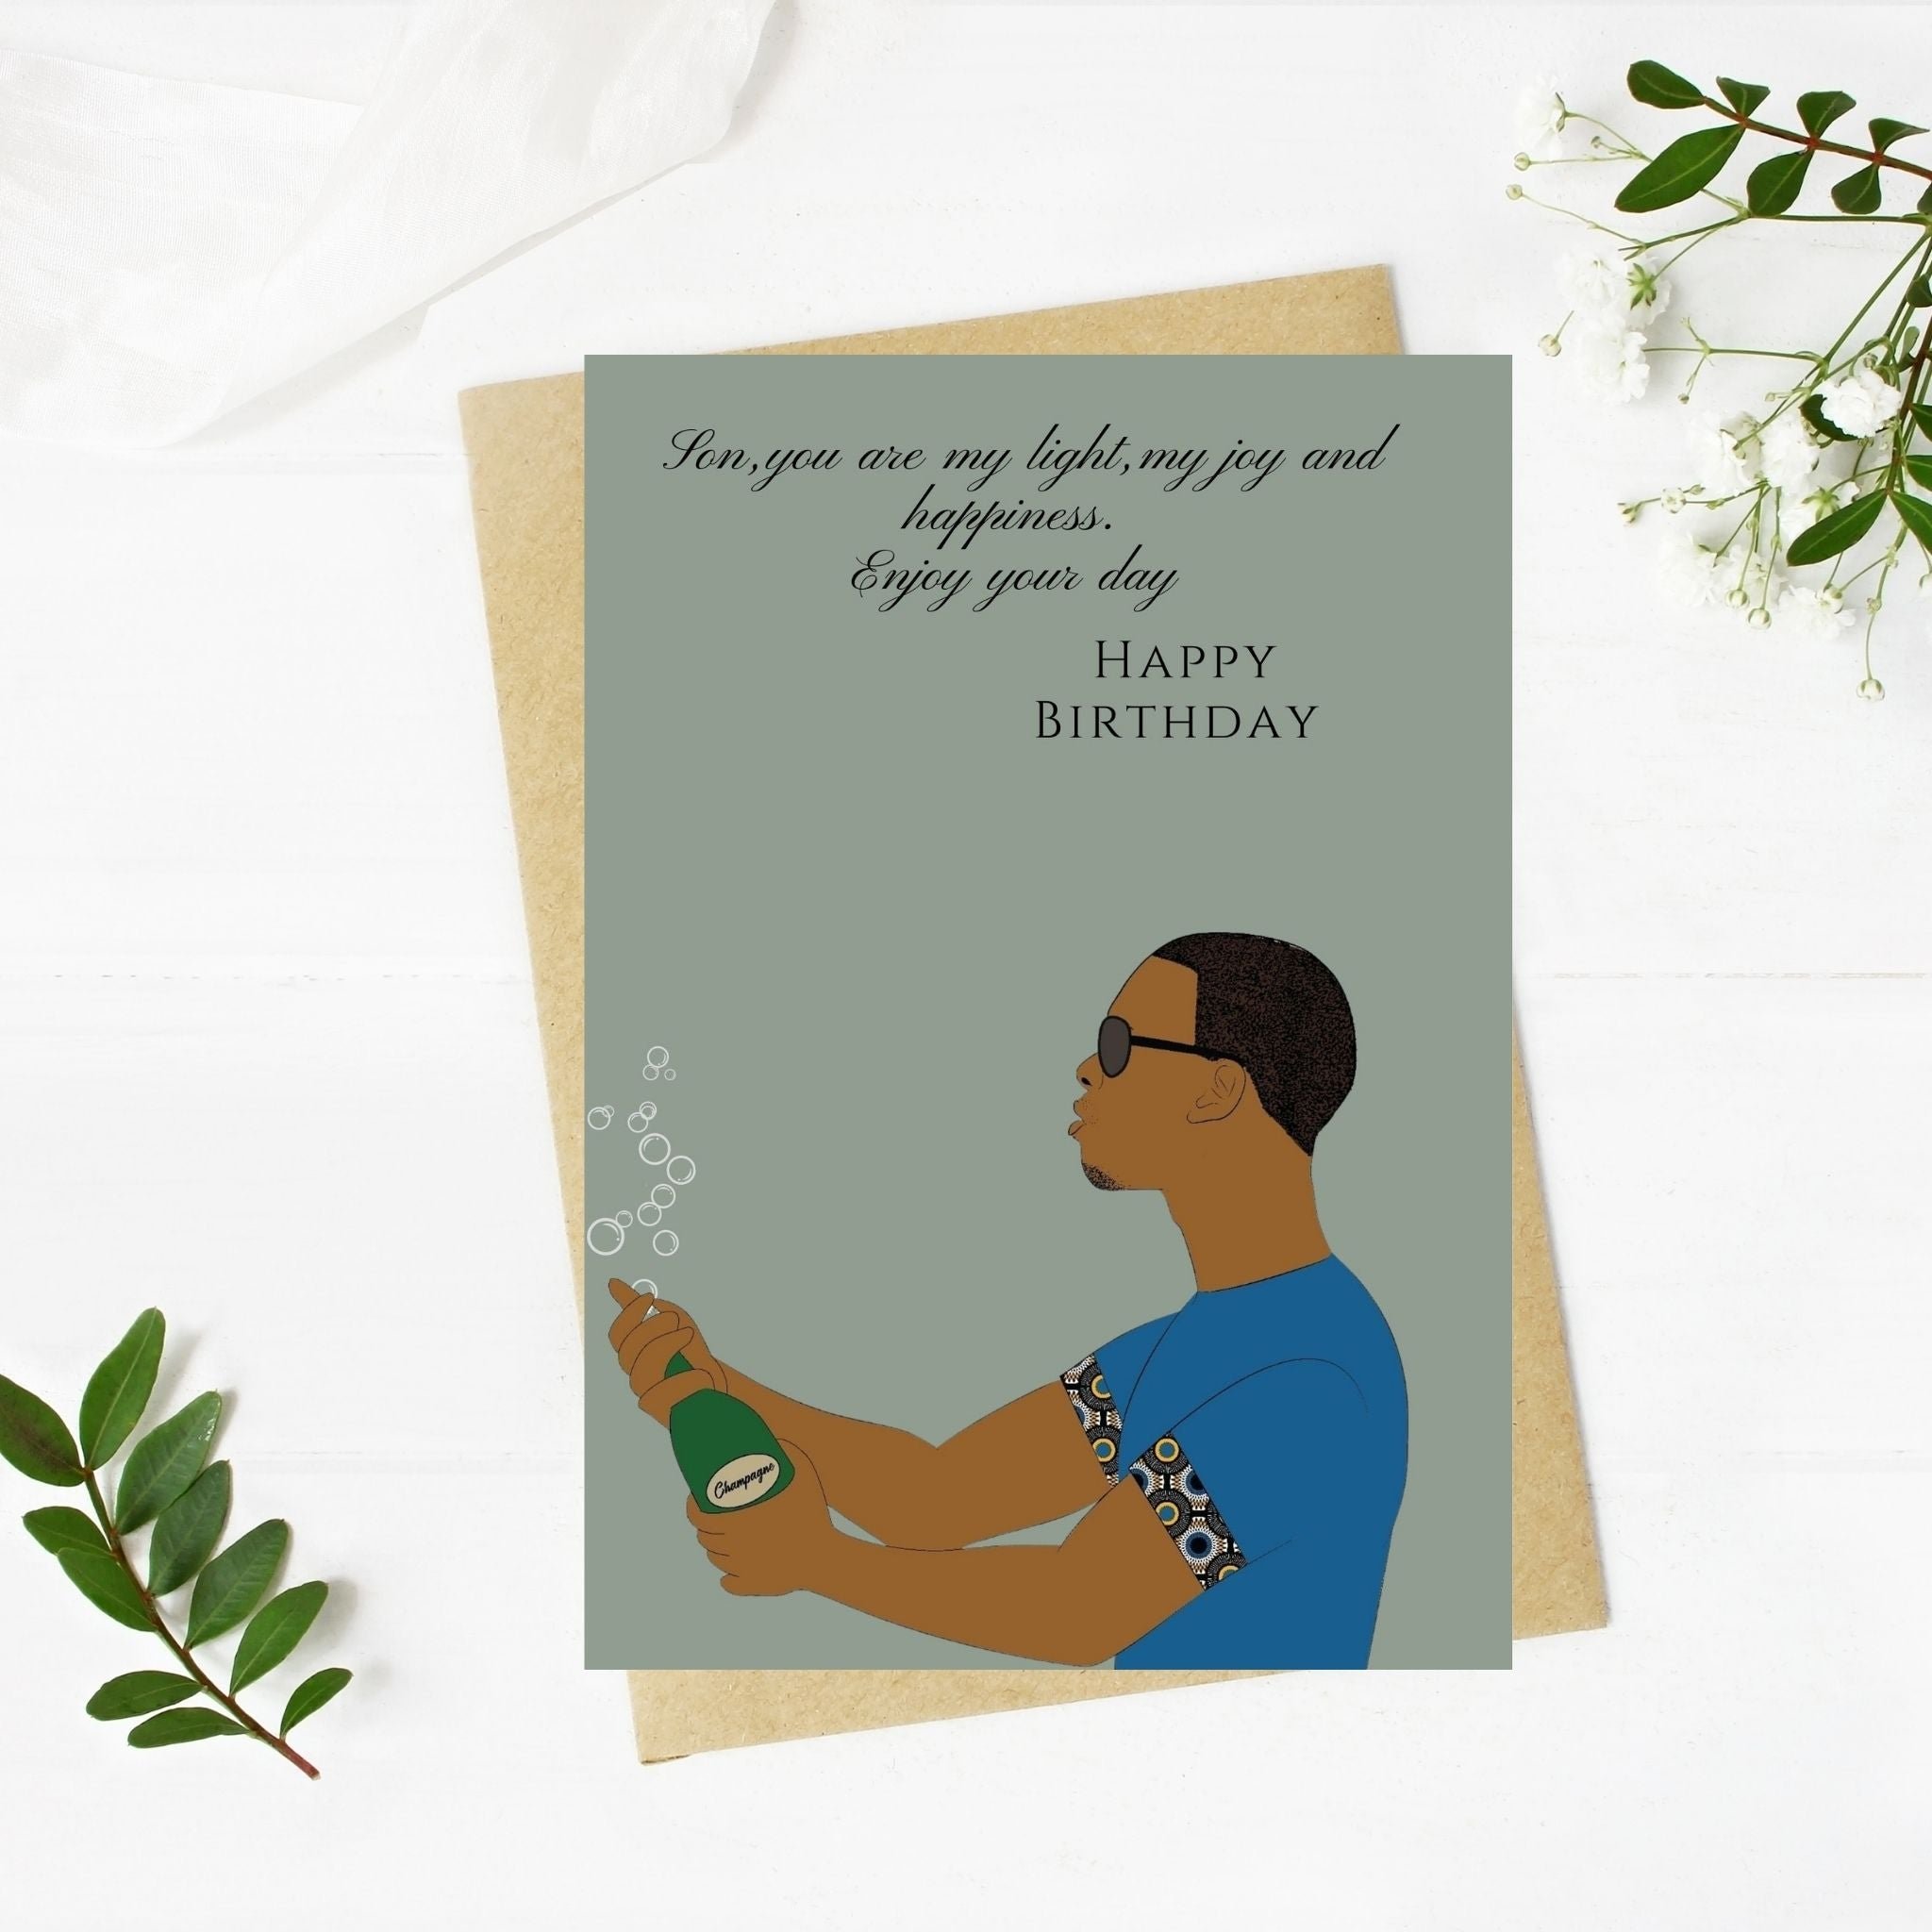 Black Man with Champagne Bottle Birthday Card for Son